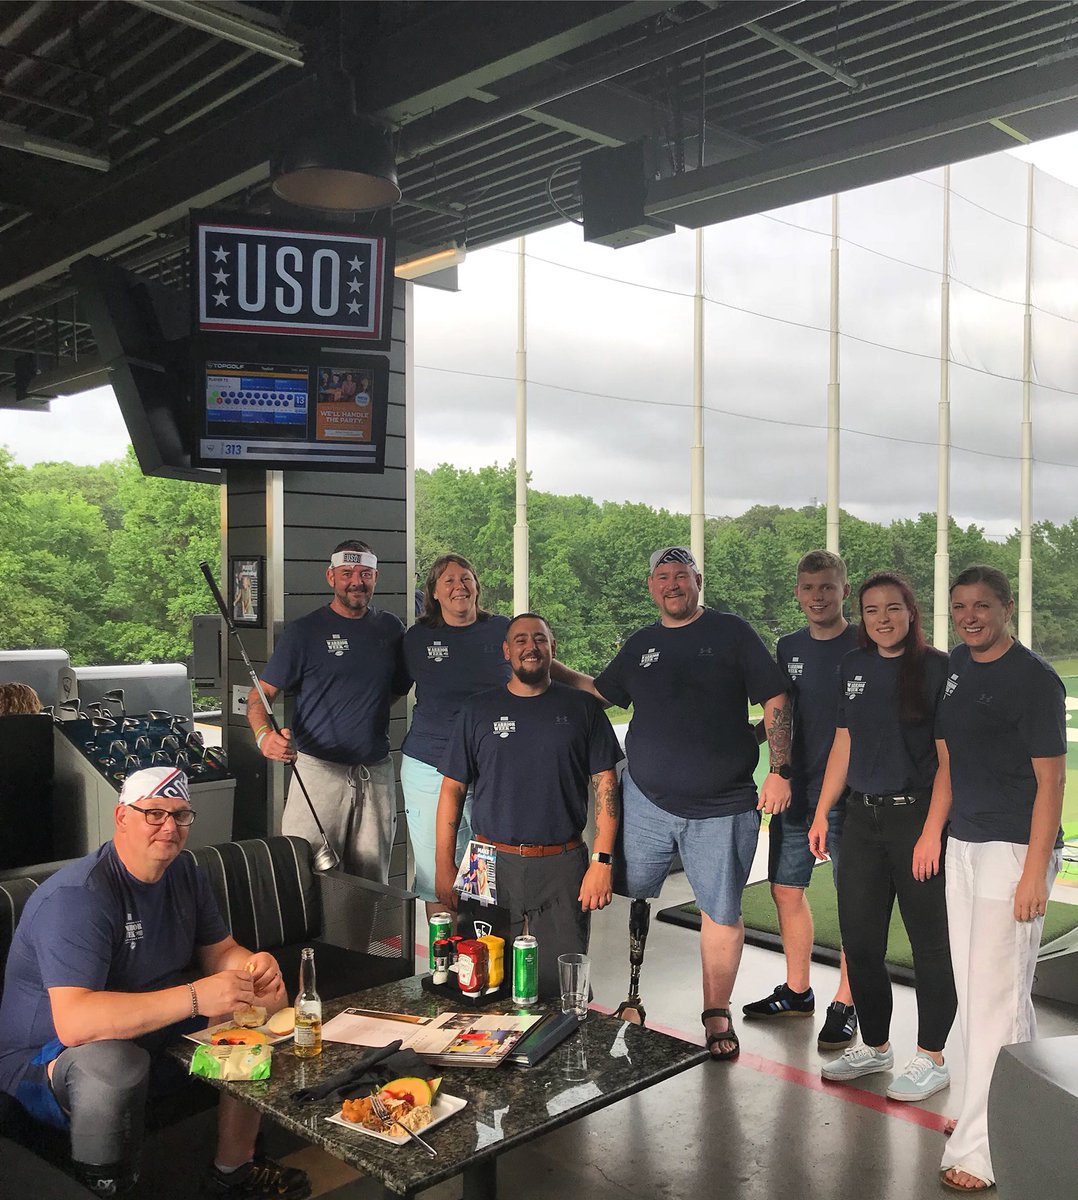 Tonight is the kickoff night to this year’s #USOWarriorWeek festivities @Topgolf Virginia Beach. Visiting from the UK are some warriors from @Blesma . Stay tuned for more updates throughout the weekend!